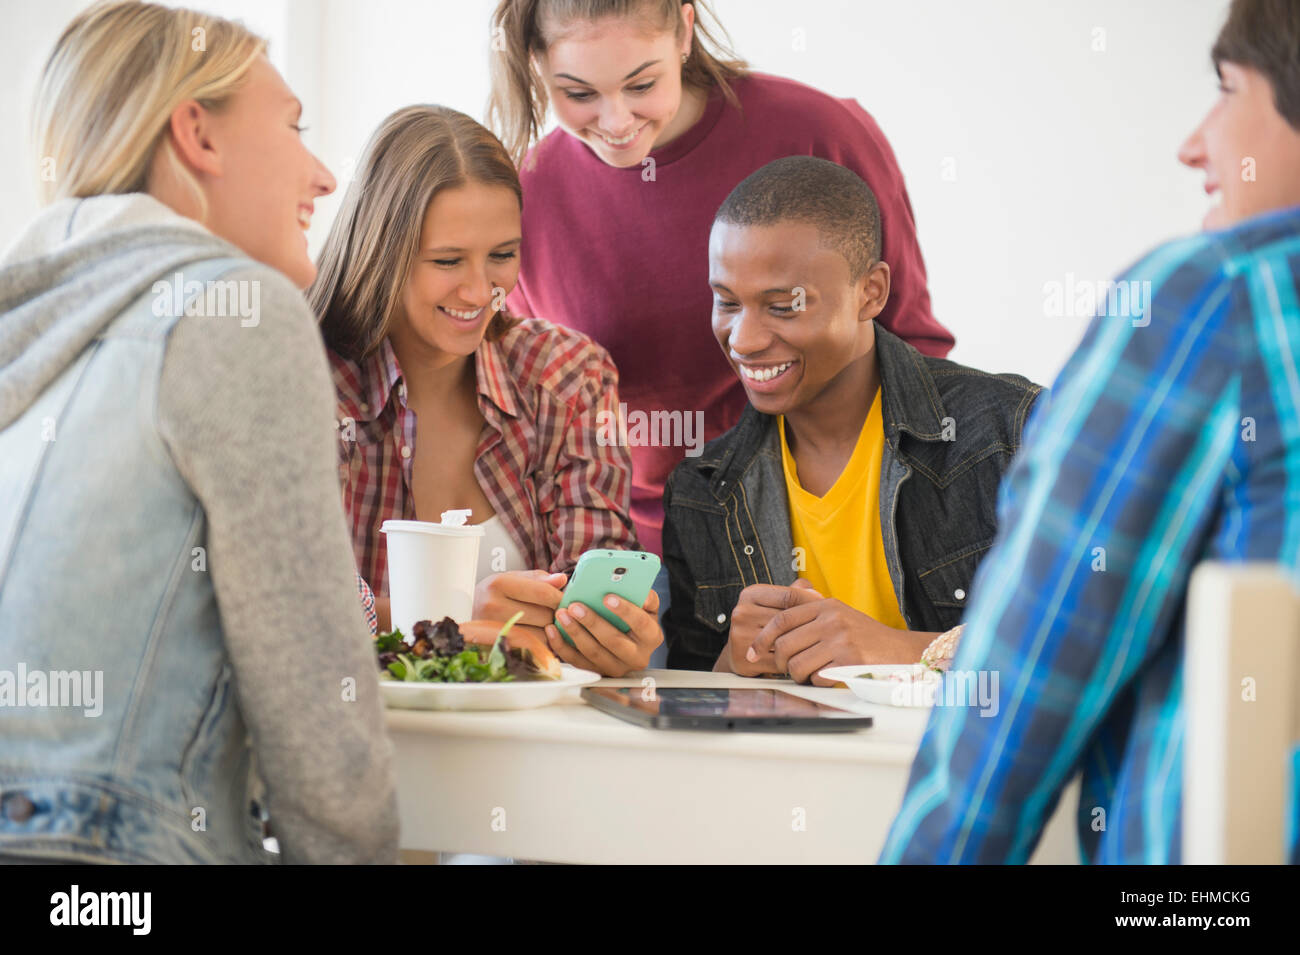 Teenagers using cell phone at table Stock Photo